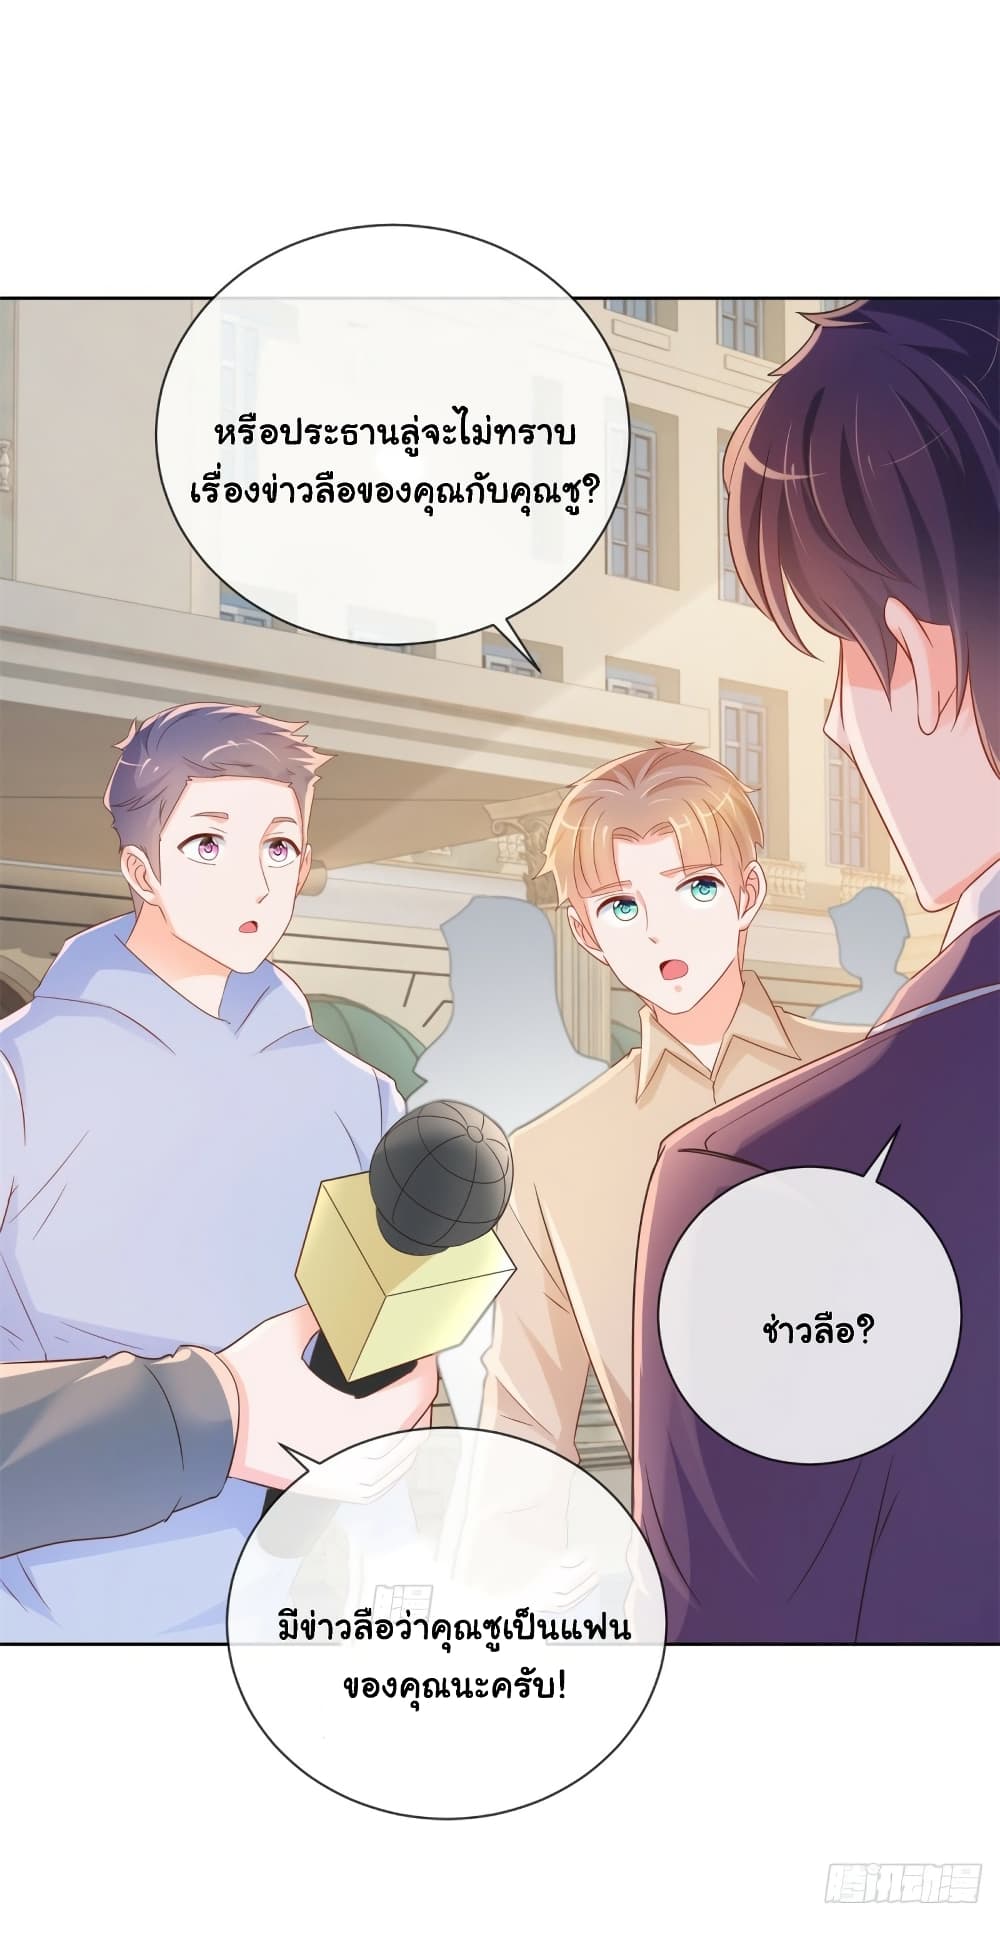 The Lovely Wife And Strange Marriage à¹à¸œà¸™à¸£à¸±à¸à¸¥à¸§à¸‡à¹ƒà¸ˆ 322 (32)